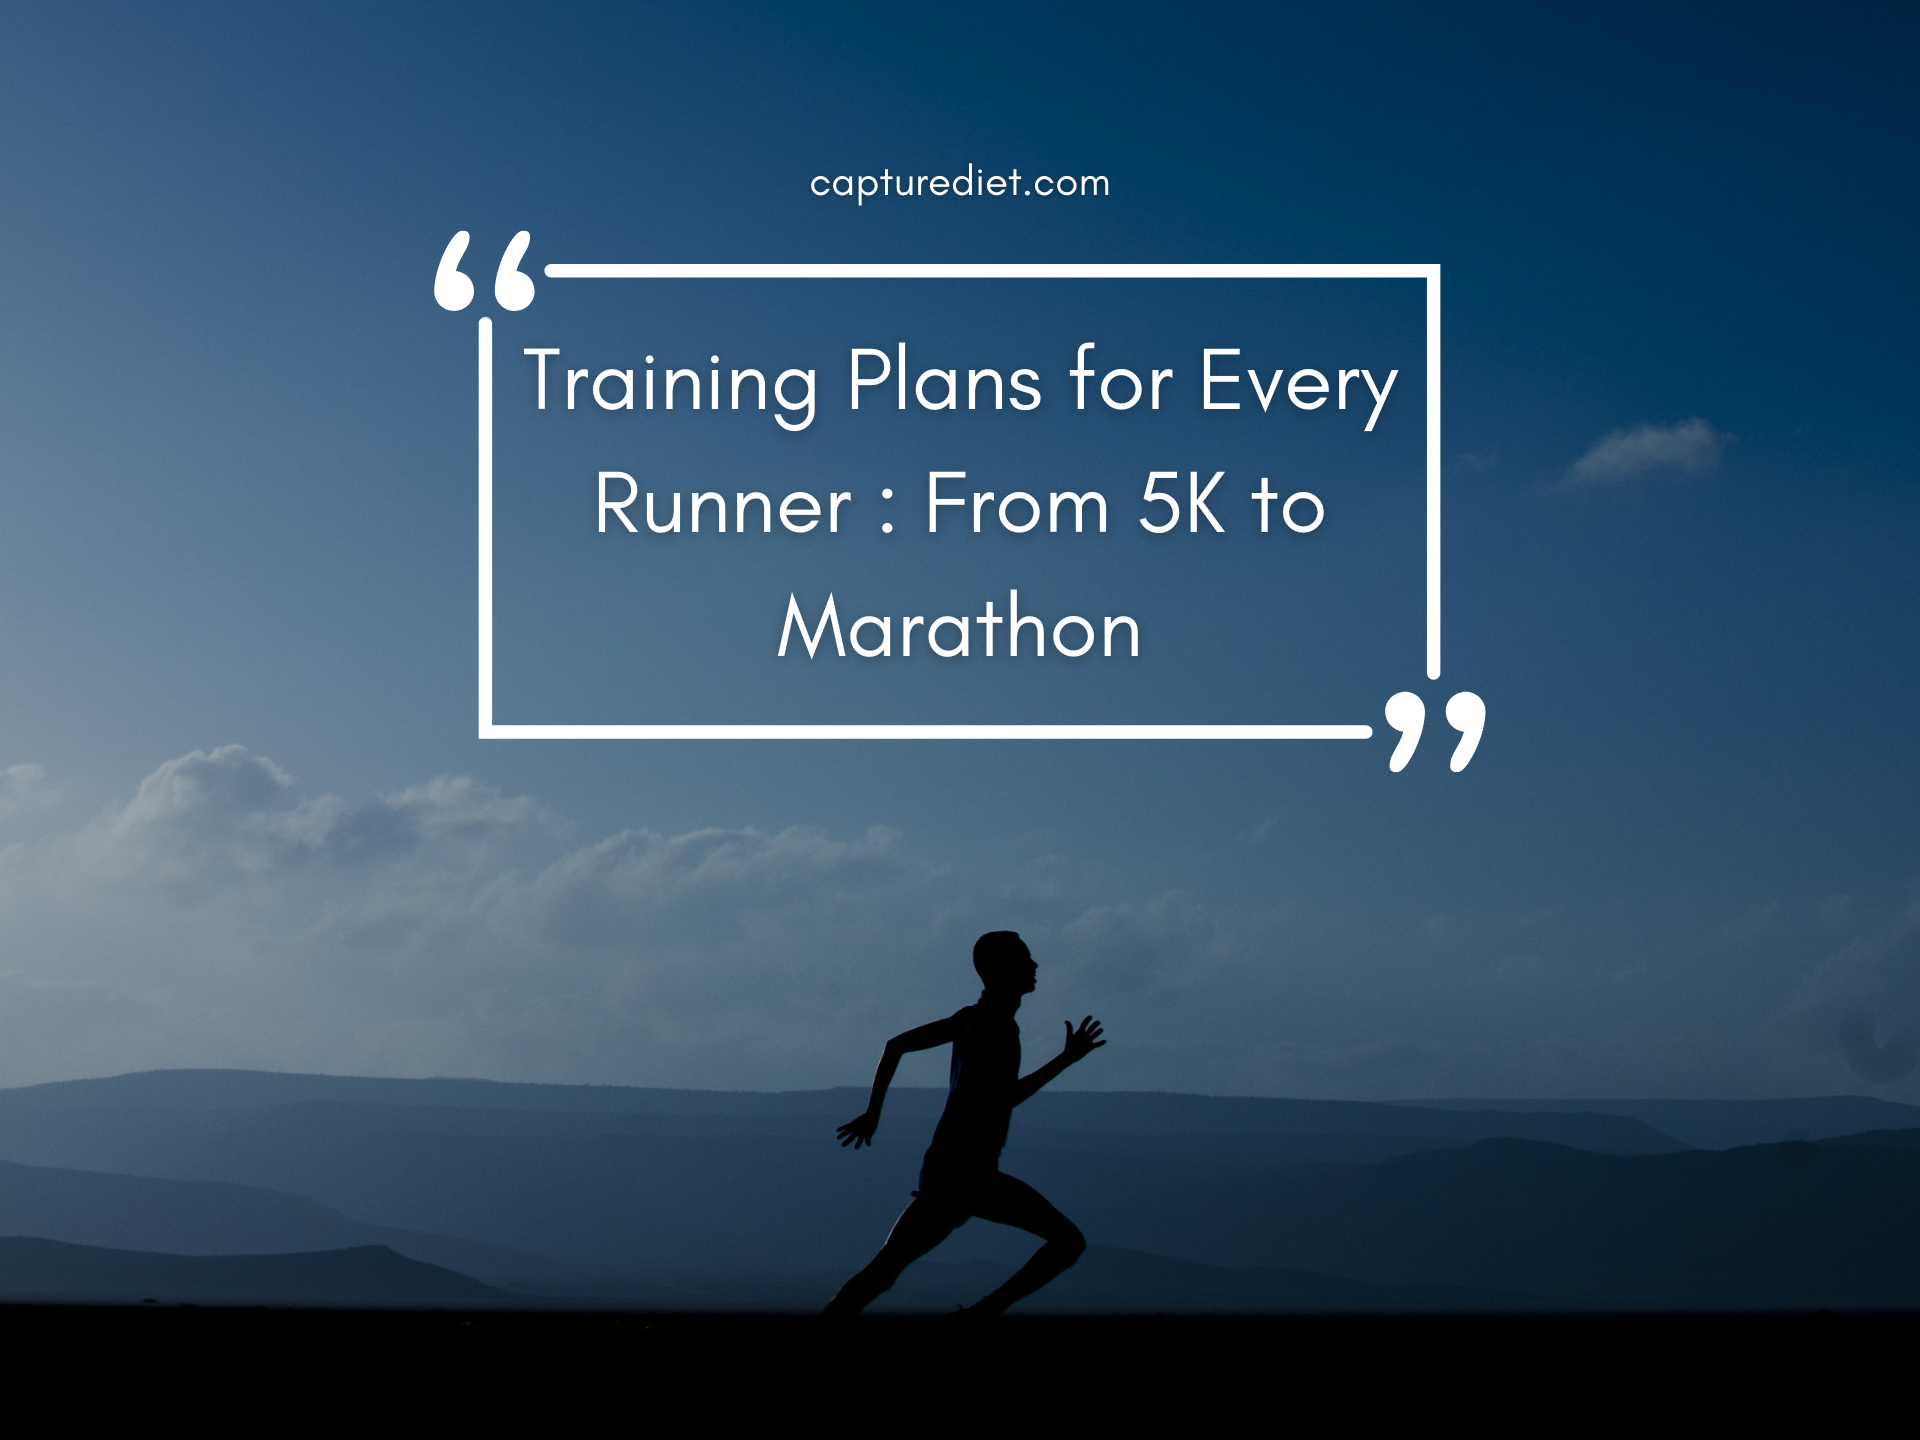 Training Plans for Every Runner : From 5K to Marathon